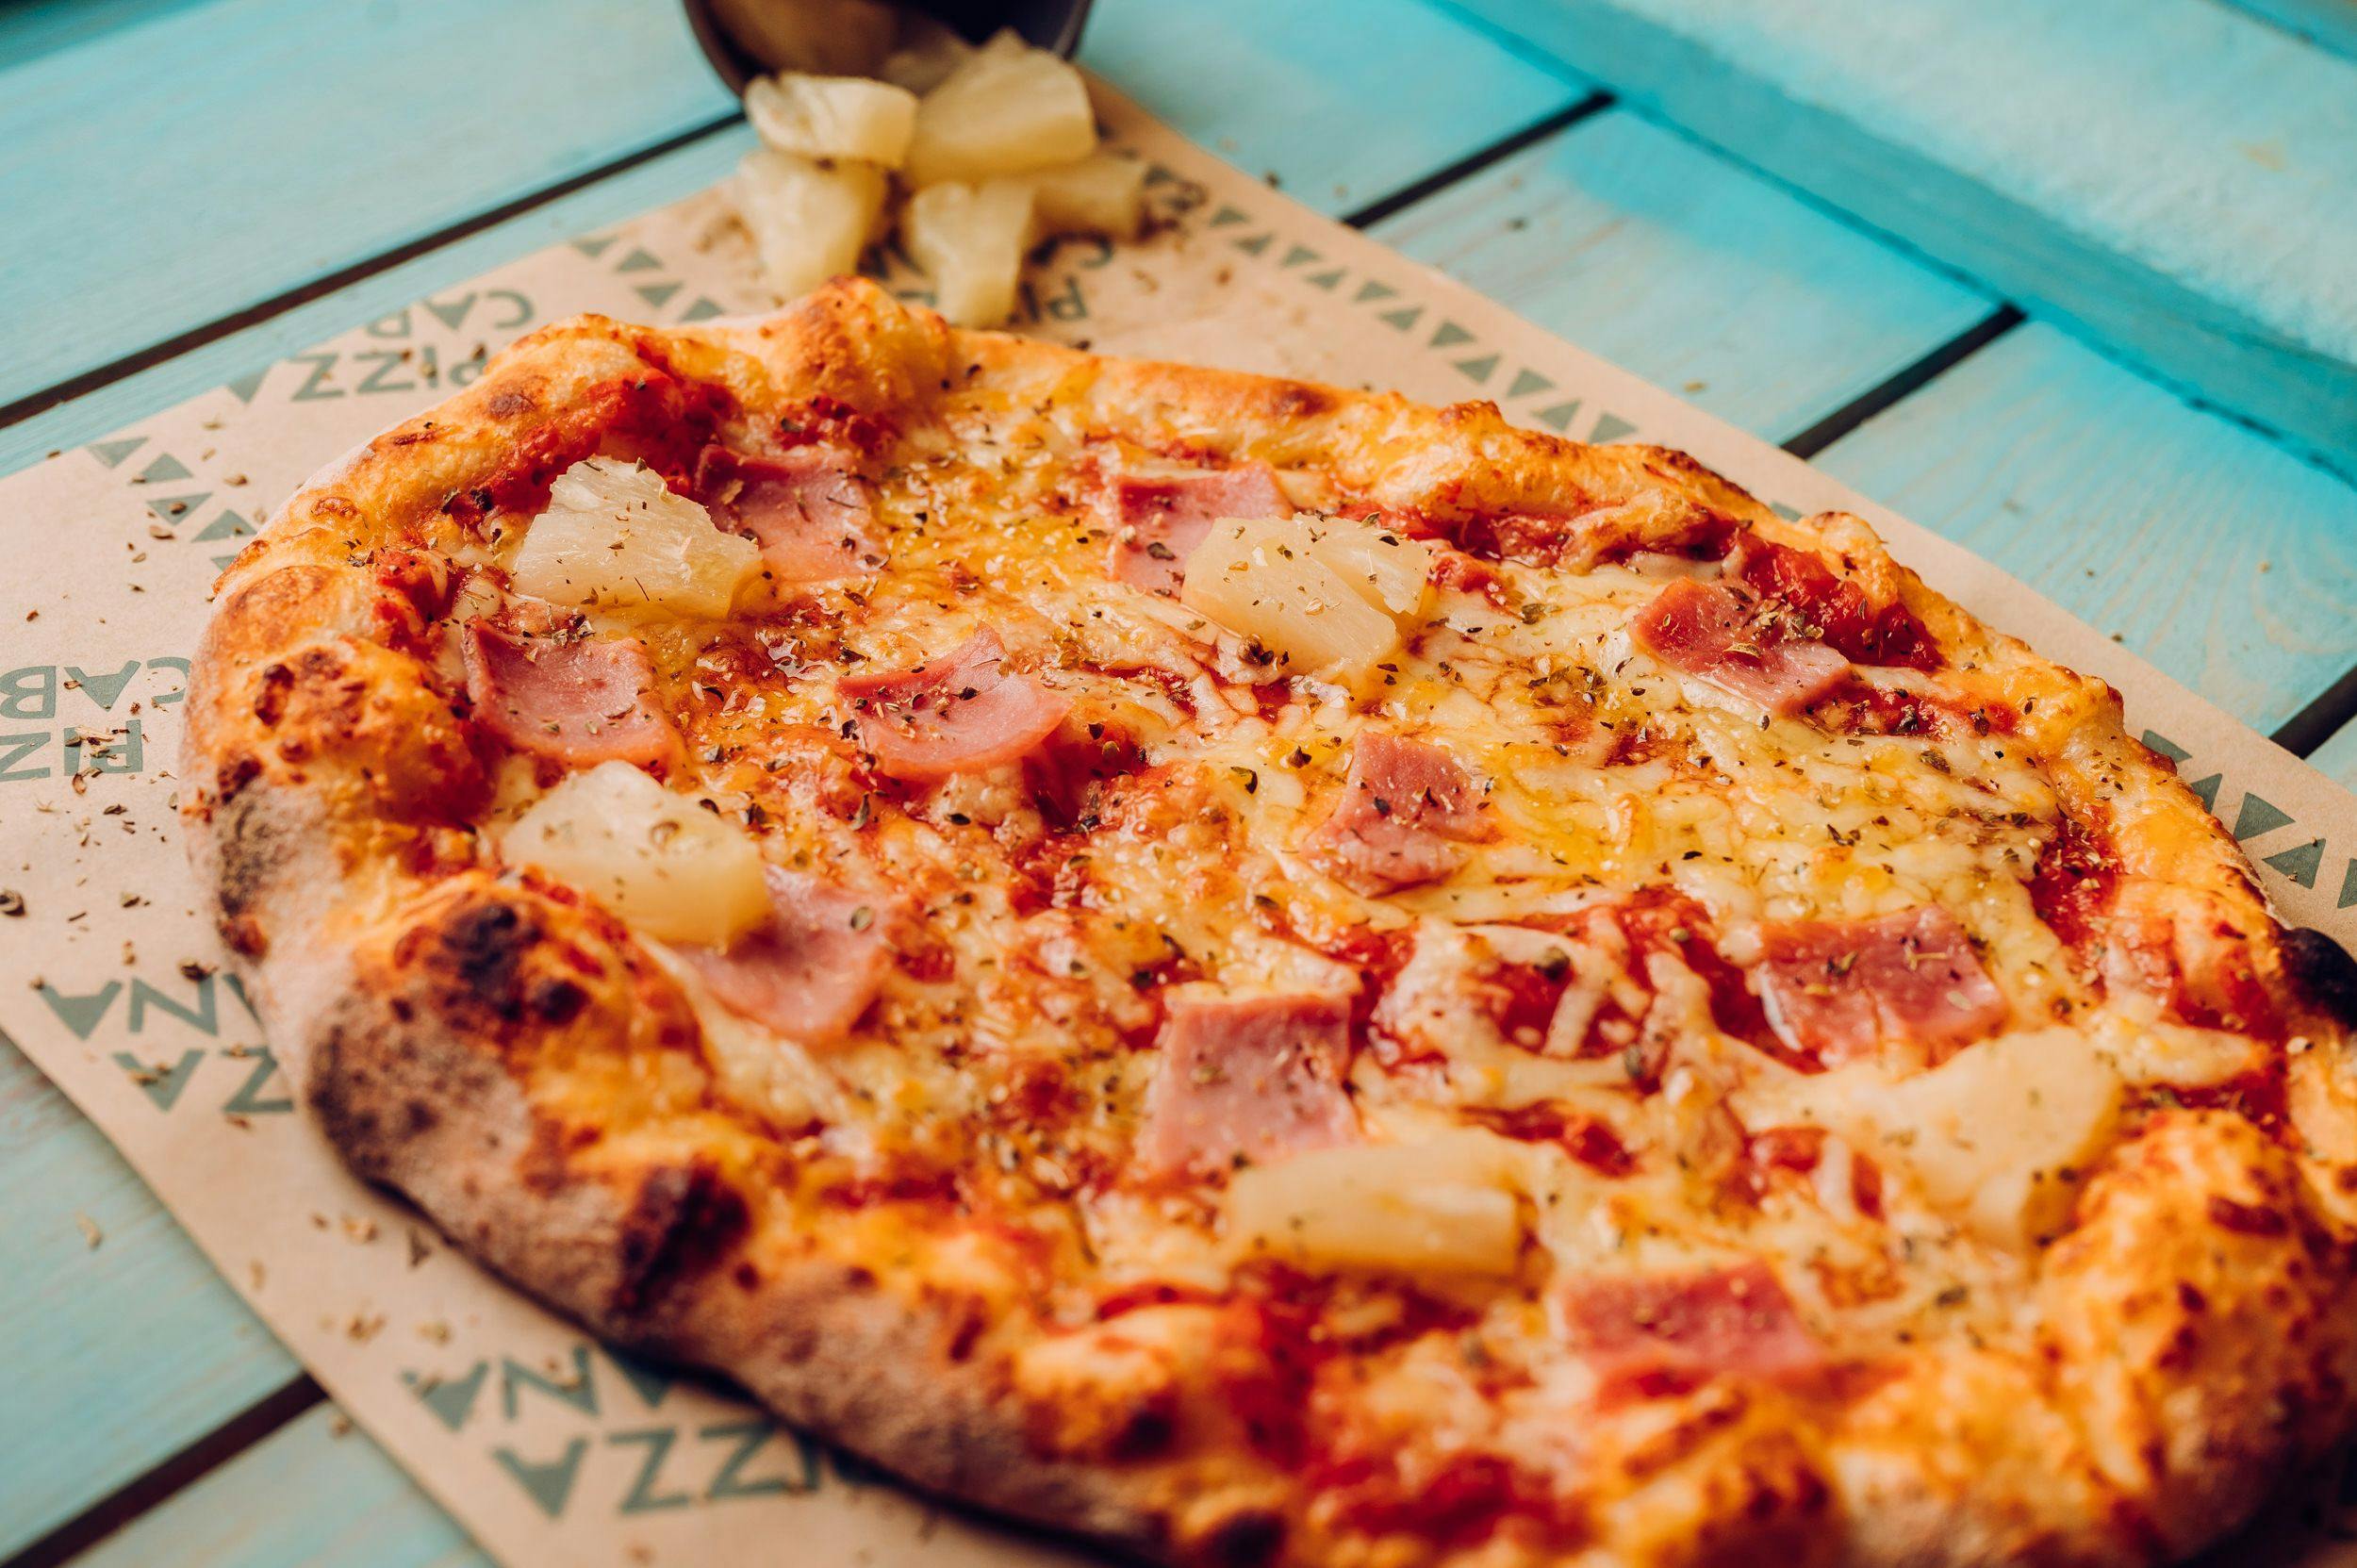 A close up of a tropical pizza with pineapple.